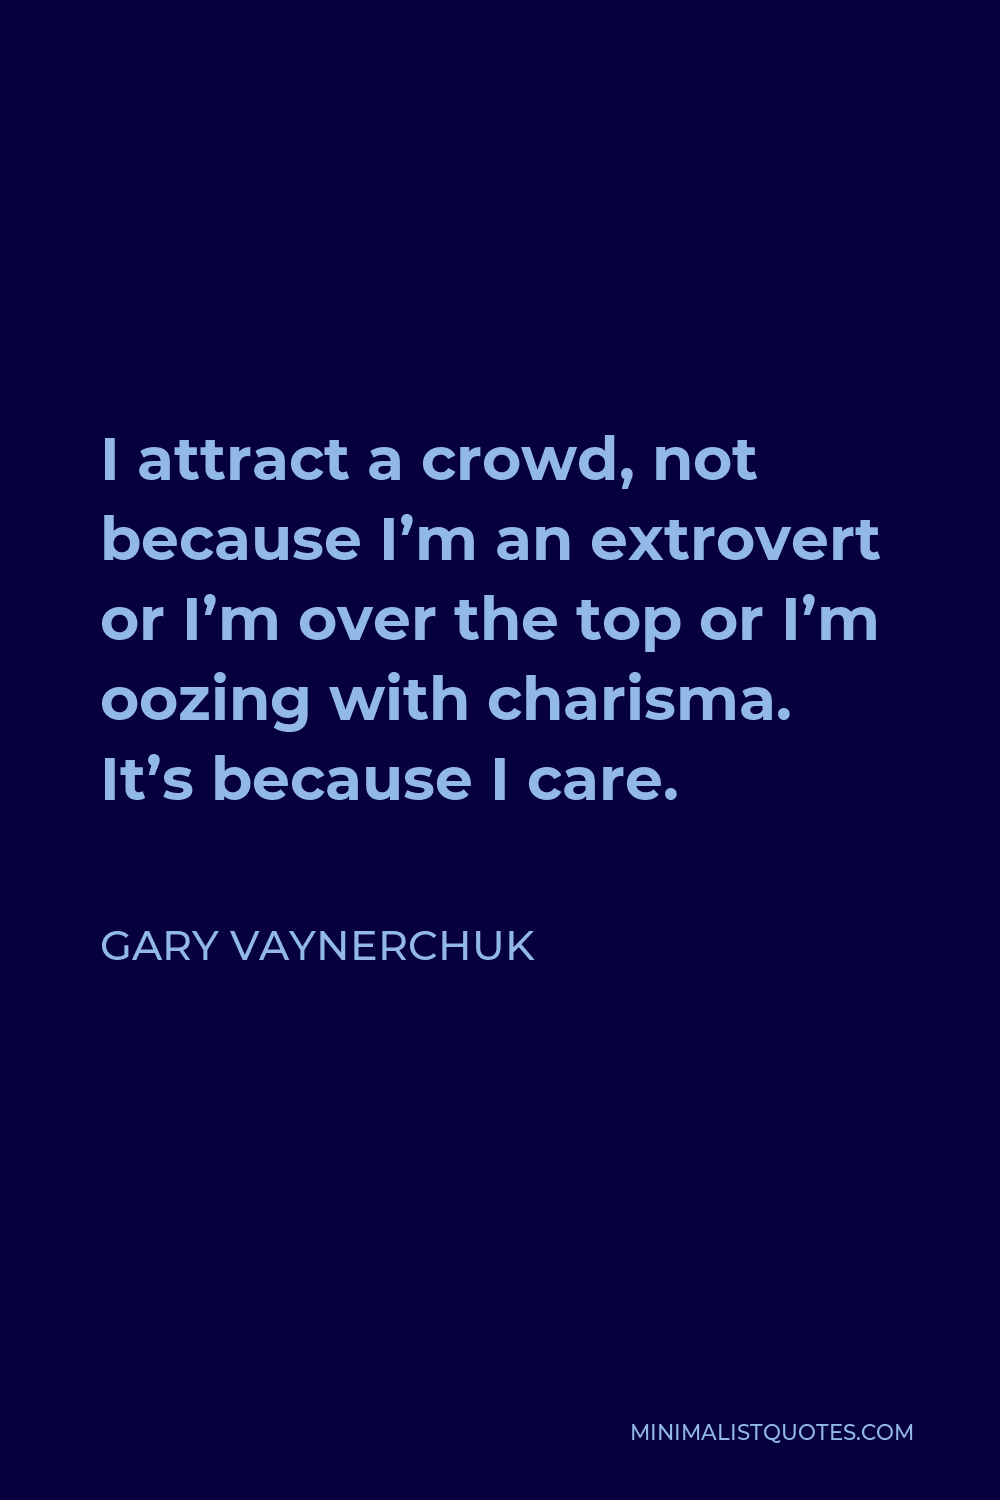 Gary Vaynerchuk Quote - I attract a crowd, not because I’m an extrovert or I’m over the top or I’m oozing with charisma. It’s because I care.